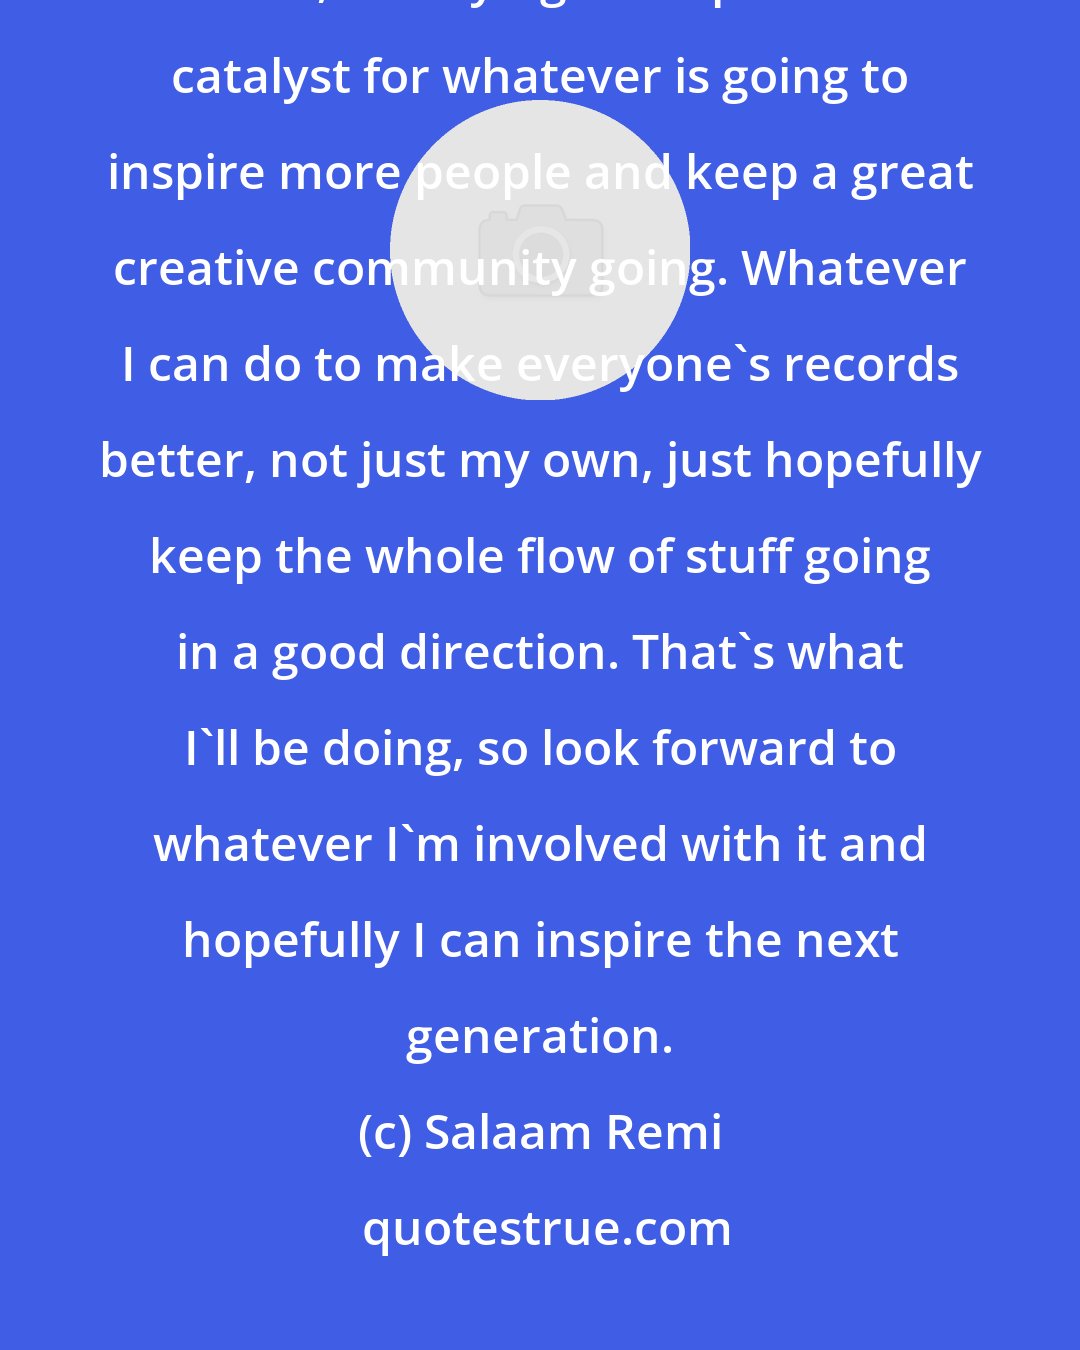 Salaam Remi: In the future, I just think that as far as when it comes to me and my music, I'm trying to help be the catalyst for whatever is going to inspire more people and keep a great creative community going. Whatever I can do to make everyone's records better, not just my own, just hopefully keep the whole flow of stuff going in a good direction. That's what I'll be doing, so look forward to whatever I'm involved with it and hopefully I can inspire the next generation.